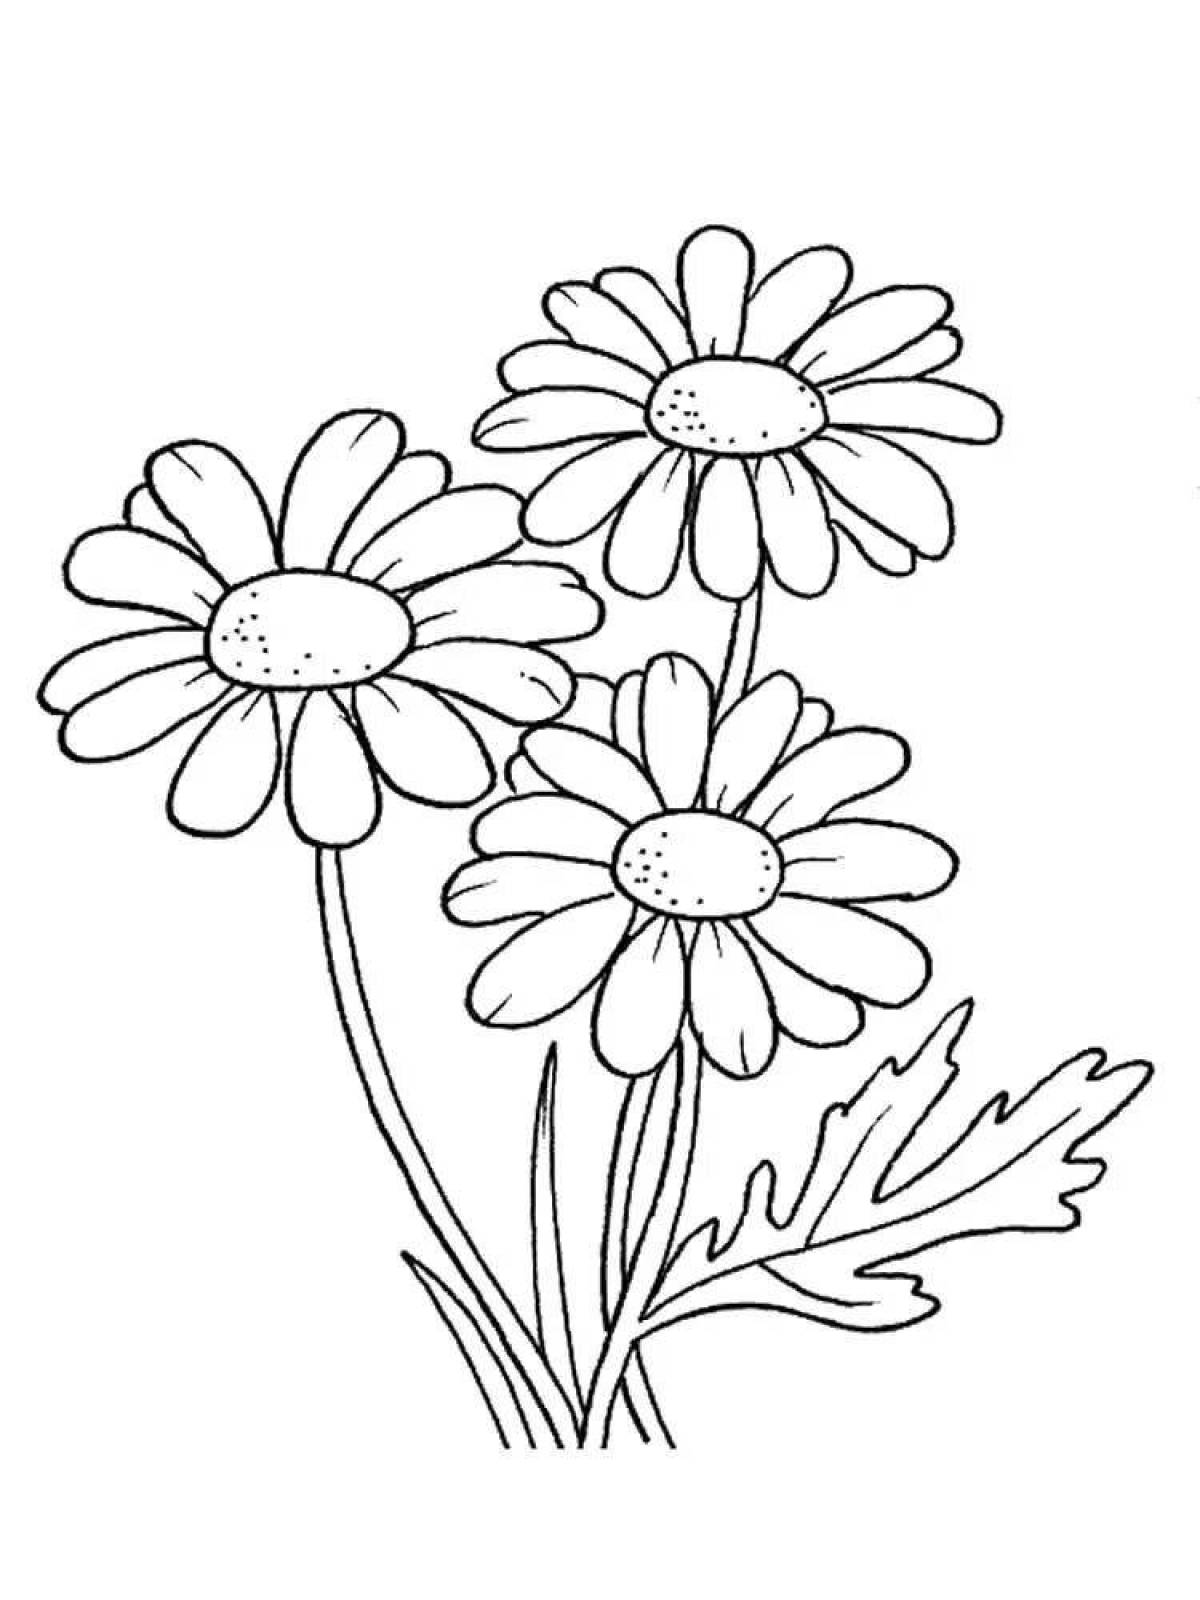 Playful flower coloring book